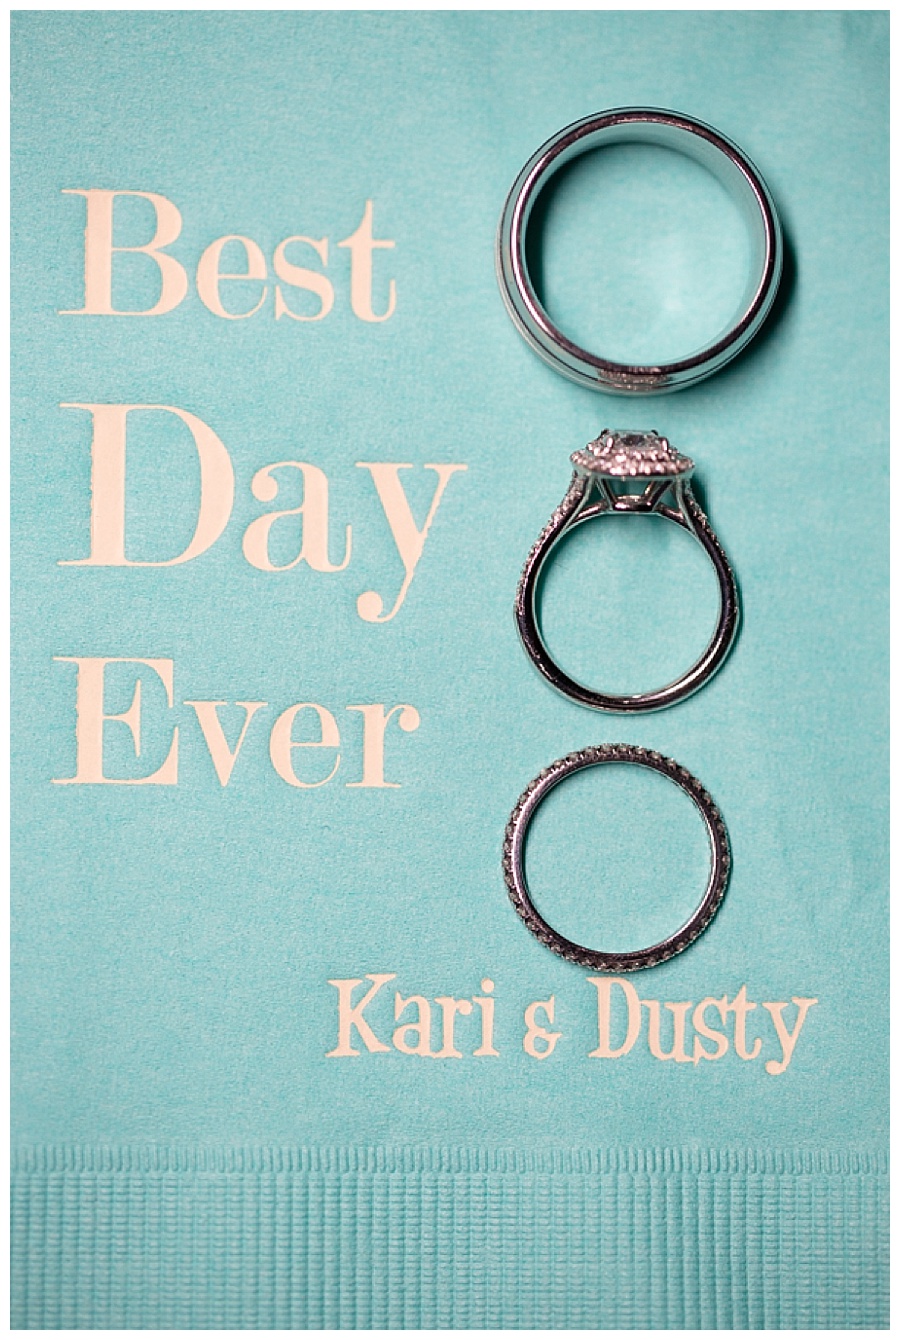 35 Best Day Ever Wedding Ring Photo